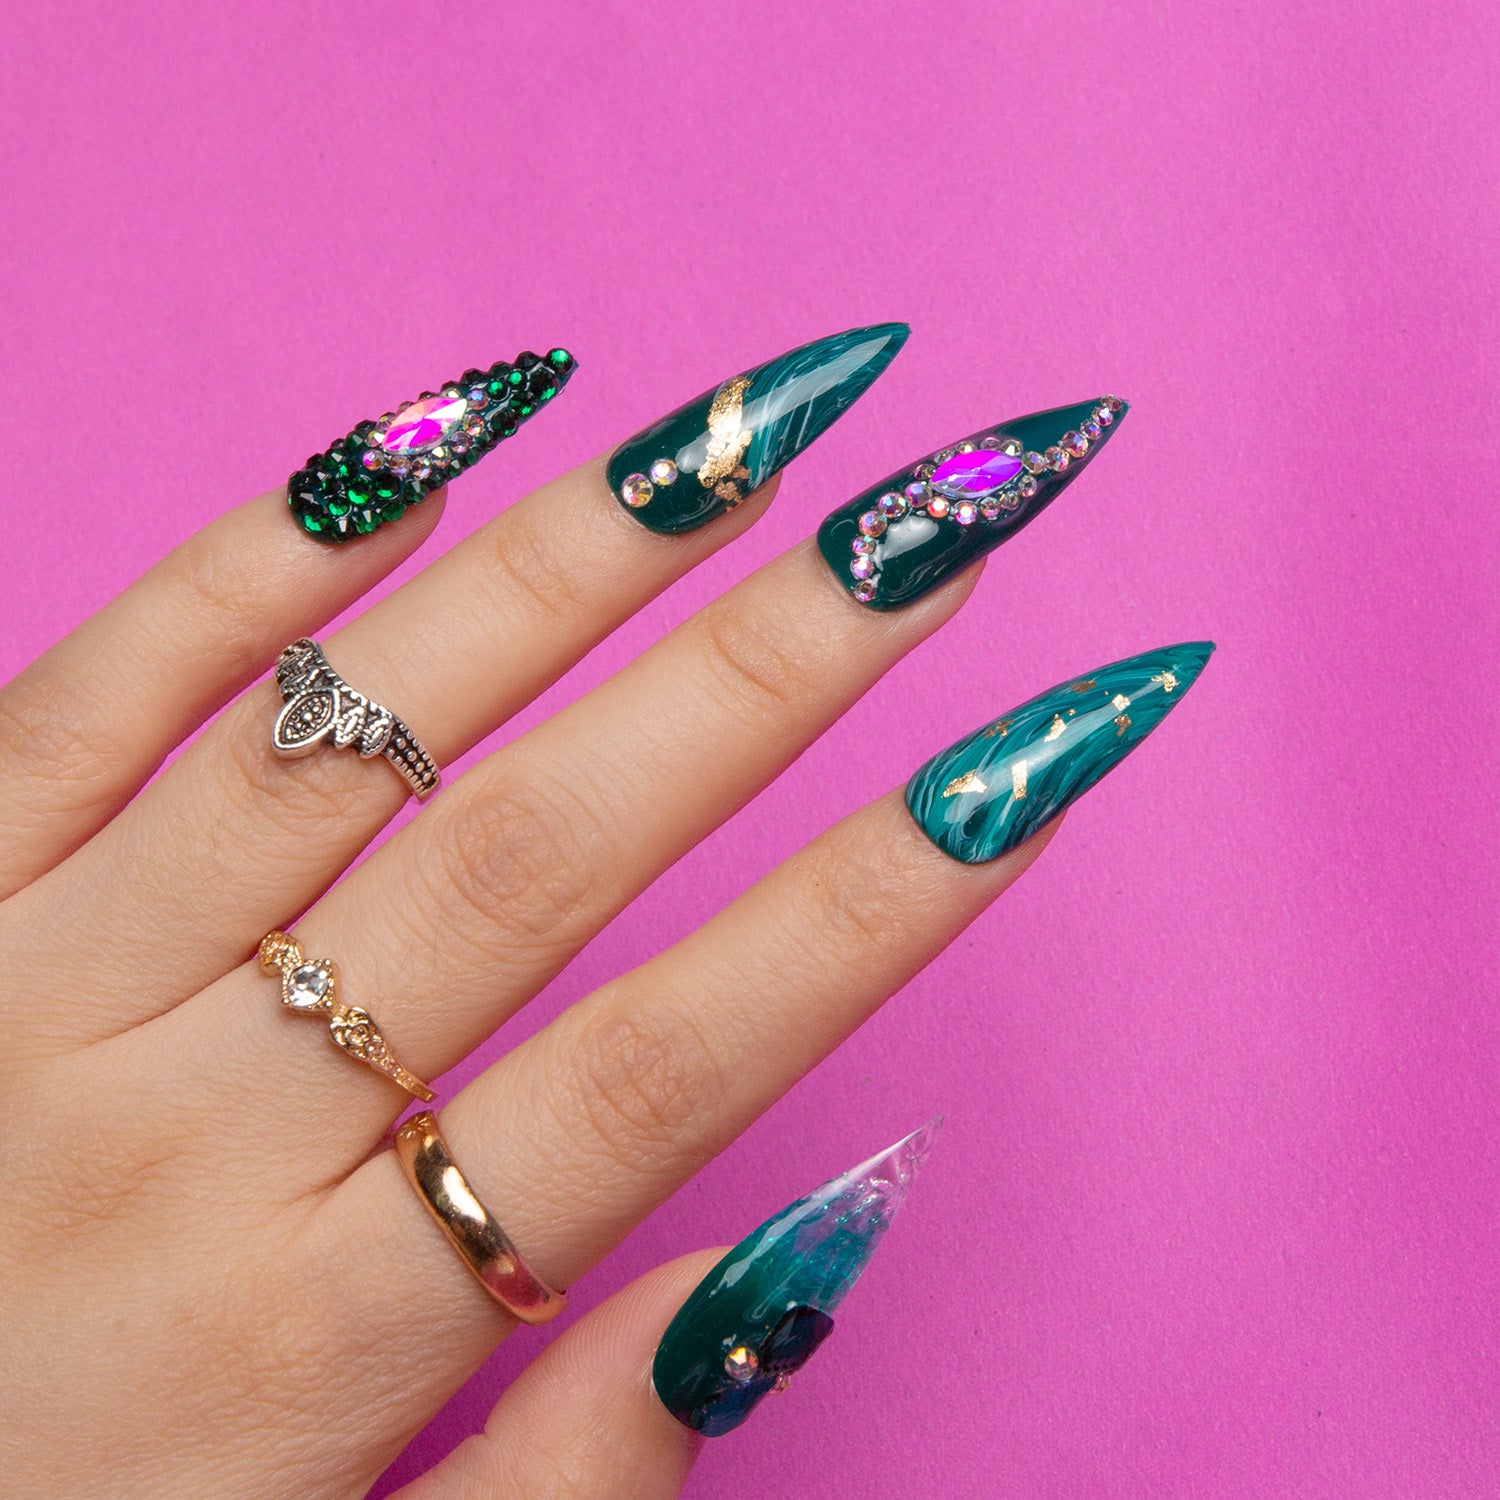 Hand with Emerald Envy Stiletto Press-On Nails featuring green hues, gold decor, and jewel embellishments, set against a bright pink background.